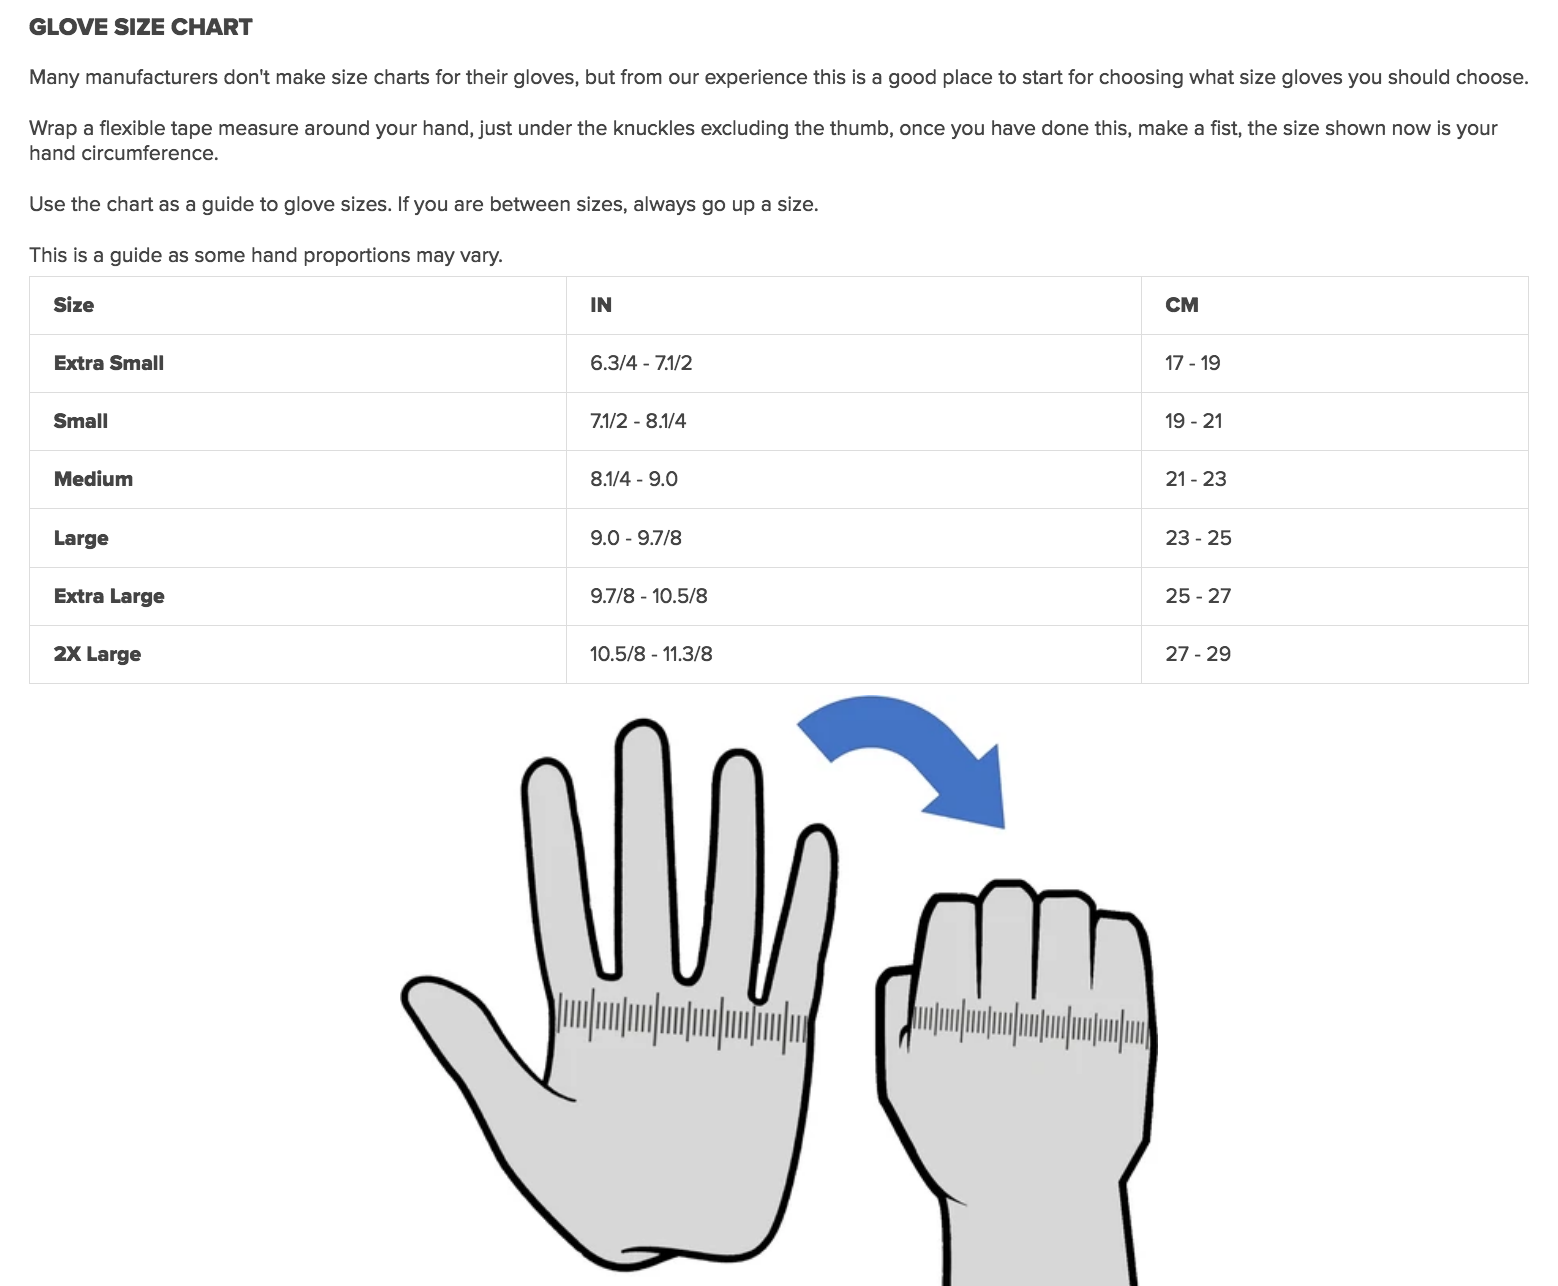 Size Chart for 7mm G1 3 Finger Semi-Dry Glove - Small Glove